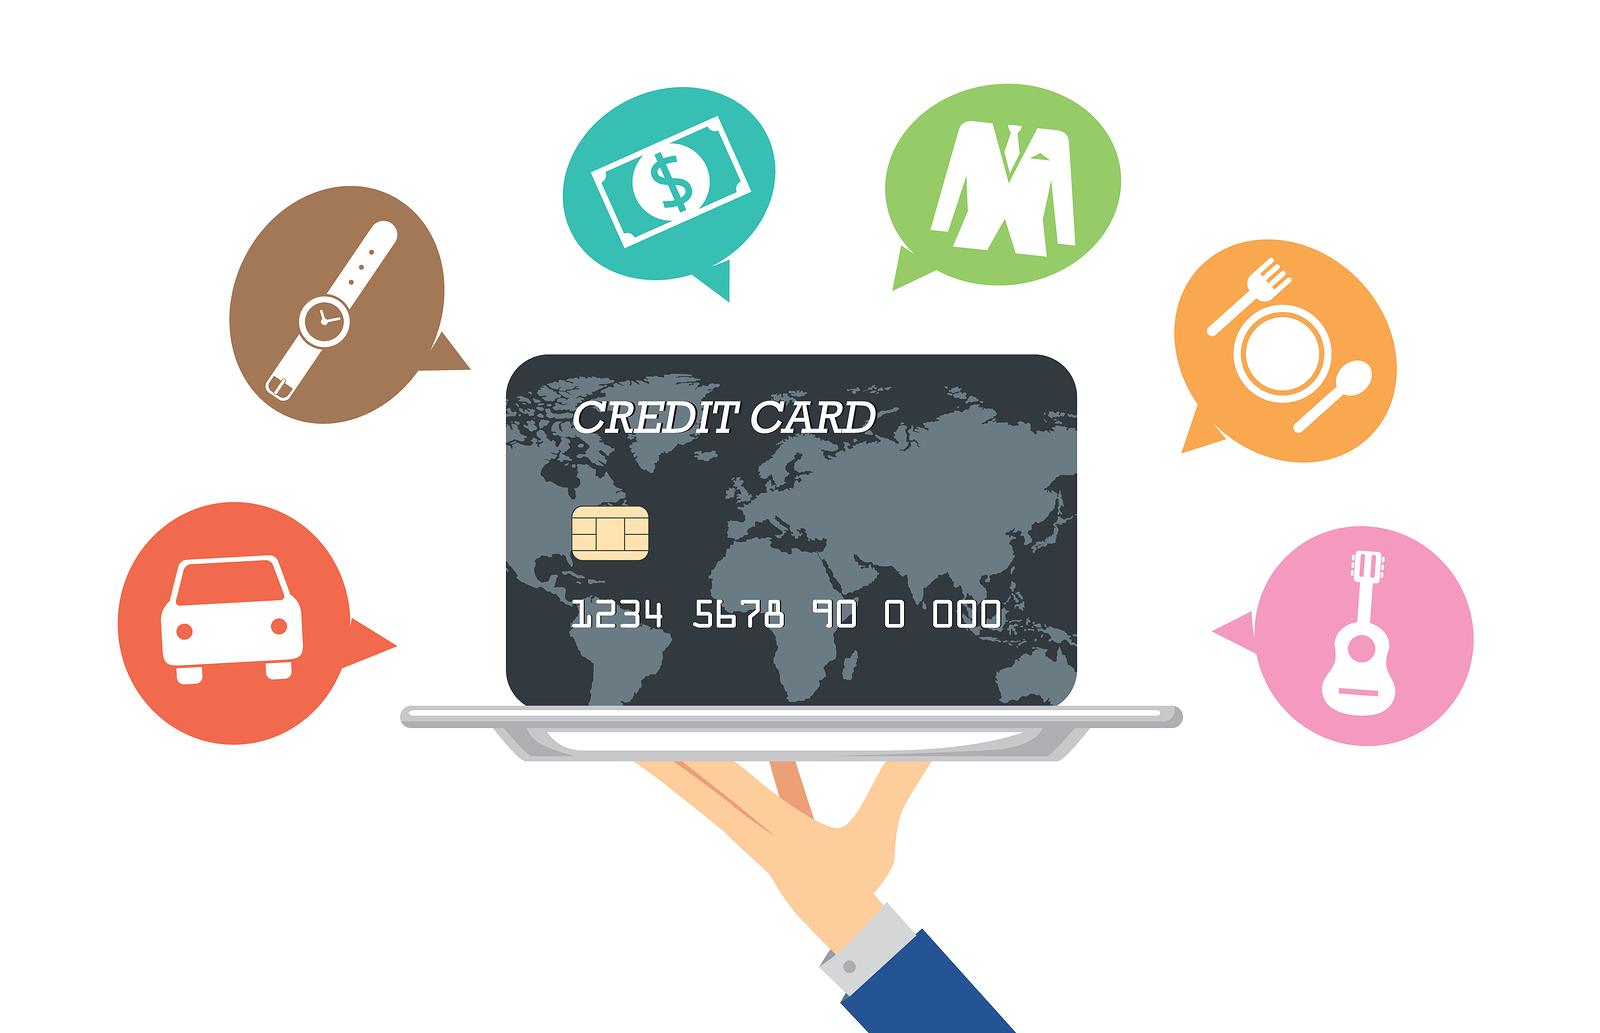 A hand holding a silver platter with a black credit card on it, surrounded by speech bubbles with icons representing rewards and promotions such as cash back, travel, dining, and entertainment.